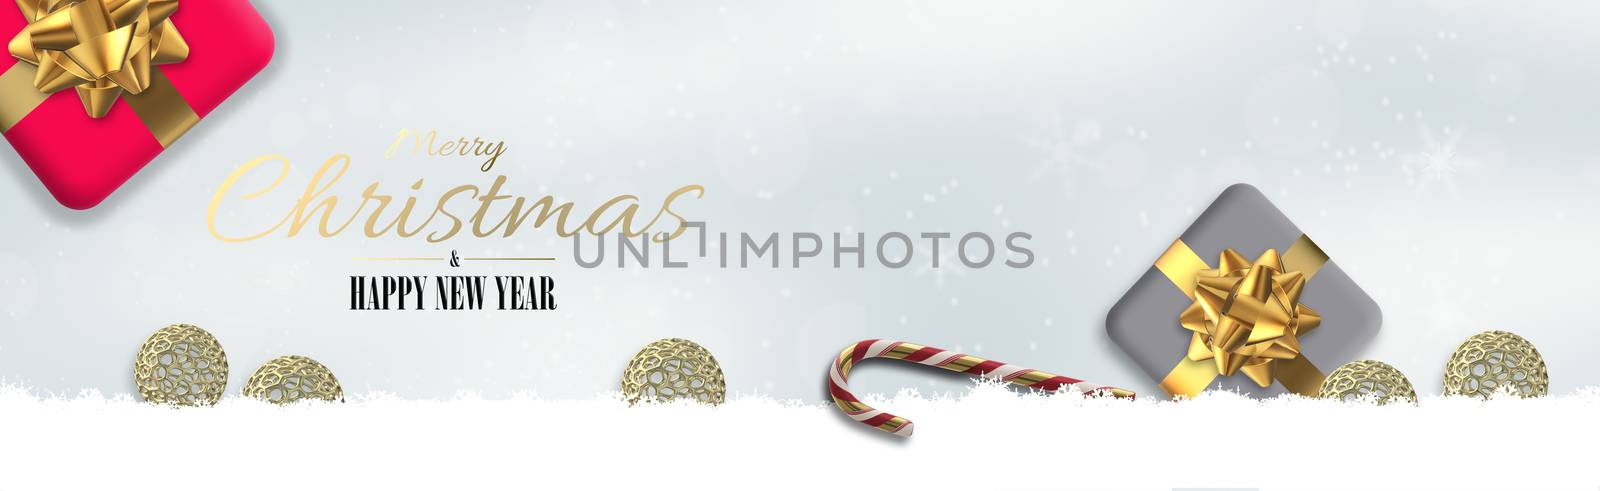 Elegant Christmas banner design with snowflakes, snow, red pink grey 3D gift boxes on pastel grey white background. 3D render. Text Merry Christmas Happy New Year. Beautiful abstract Xmas decoration